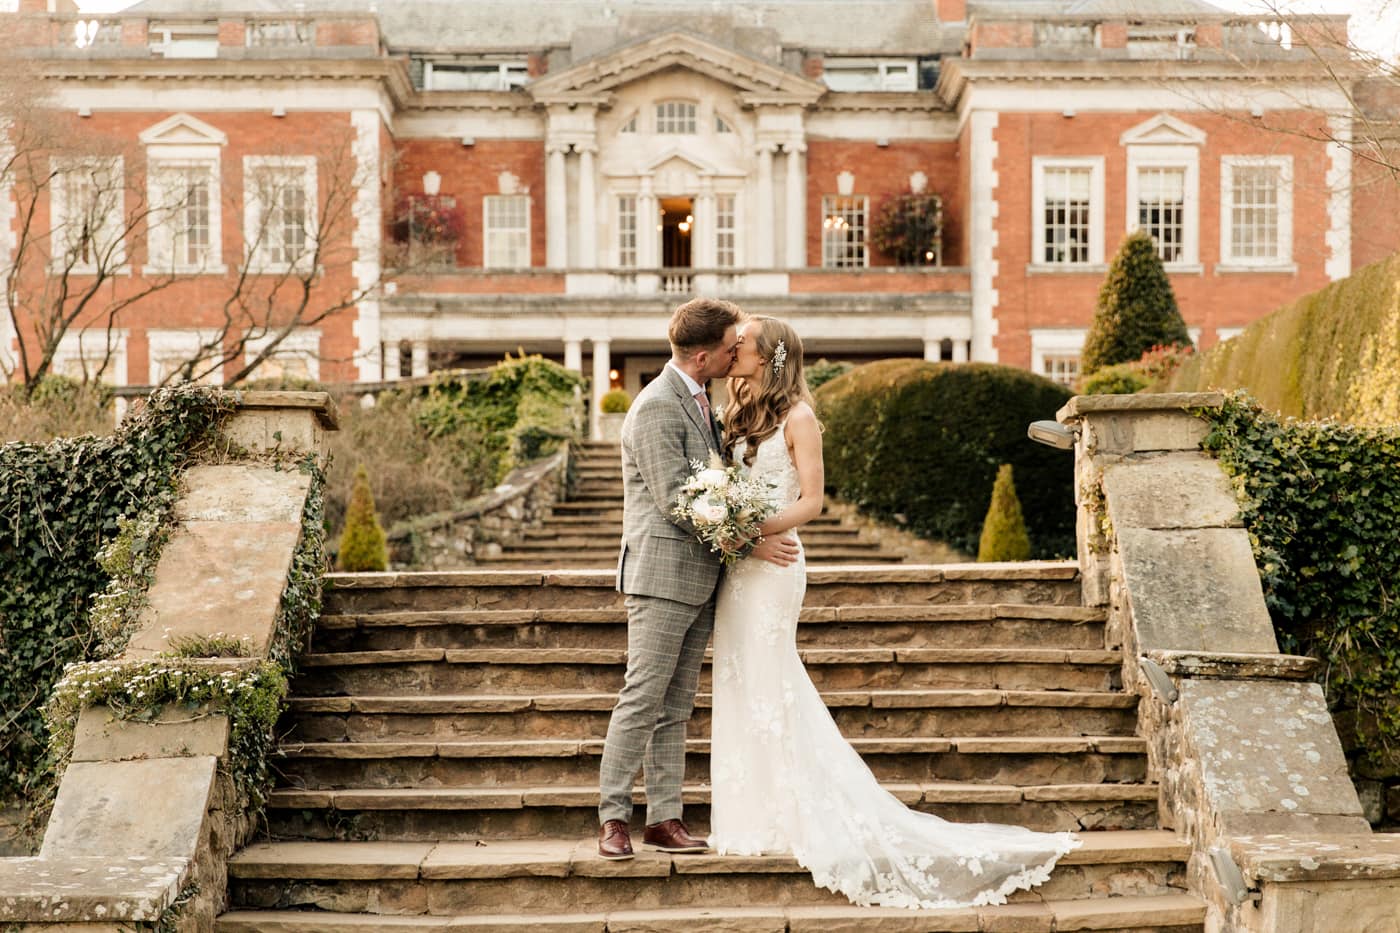 Lauren and patrick on the steps of eaves hall for their wedding portrait